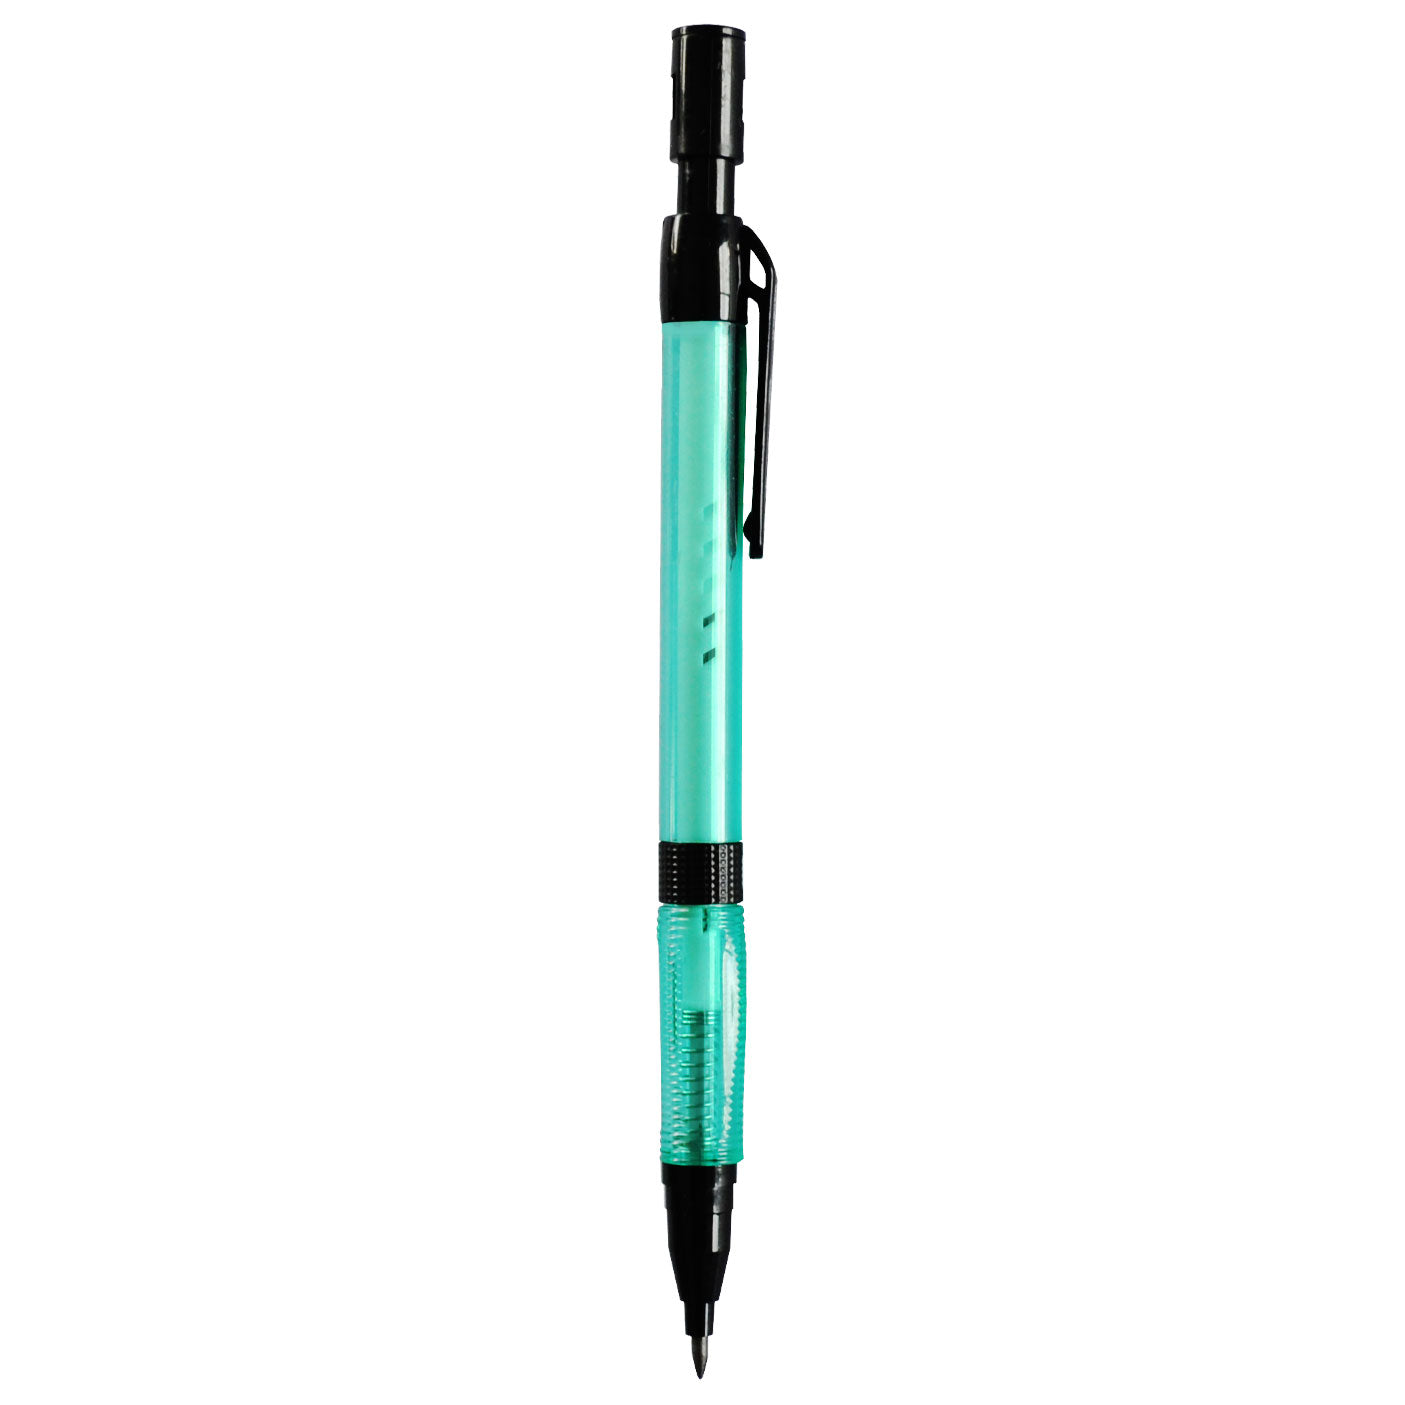 Tyco Triangular HB Mechanical Pencil TY-520 With Lead Sharpener 2.00mm Green